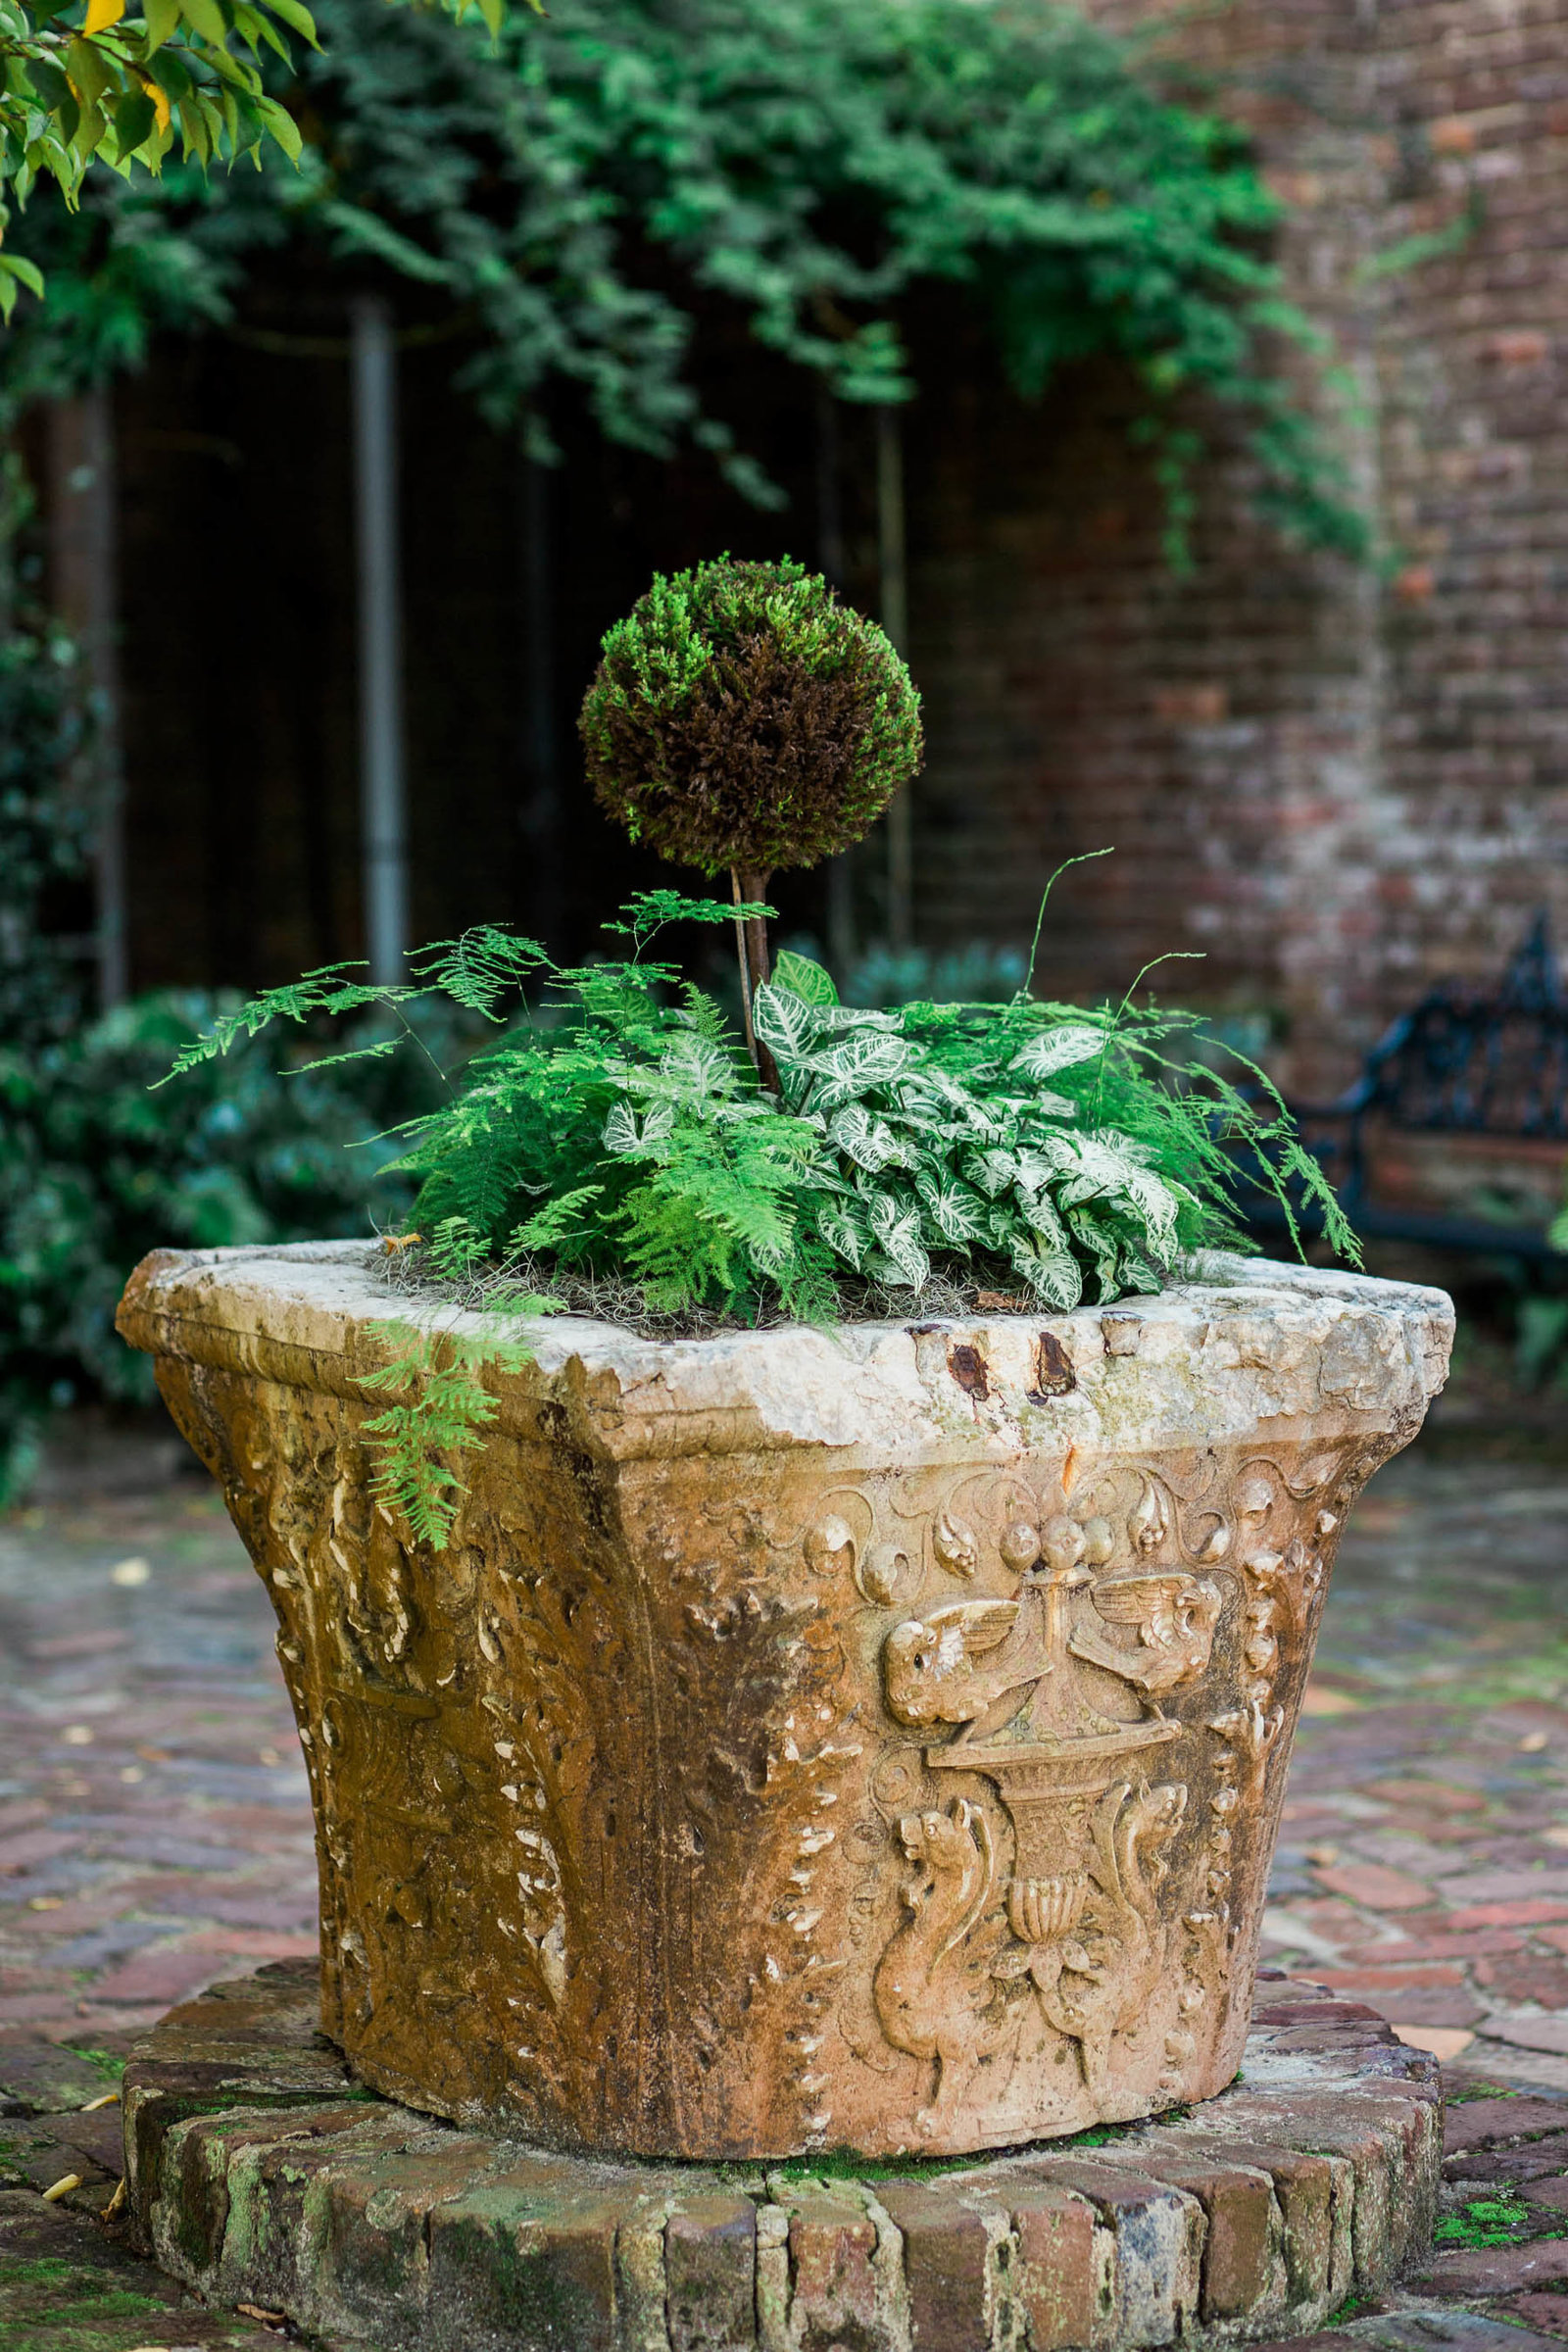 Plant is in open courtyard, Boone Hall Plantation, Charleston, South Carolina